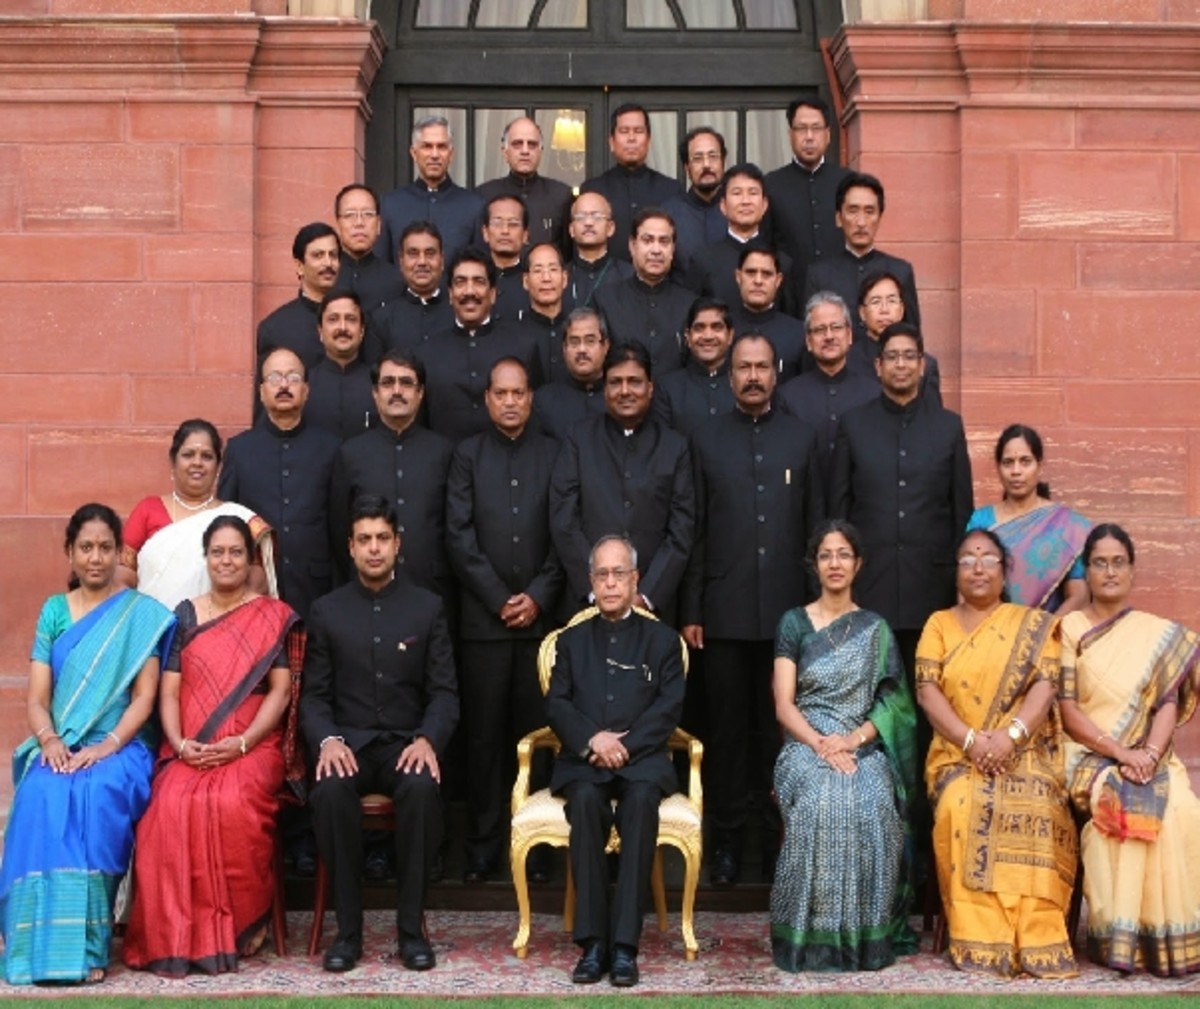 Some IAS officers with Pranab Mukherjee, the 13th President of India.